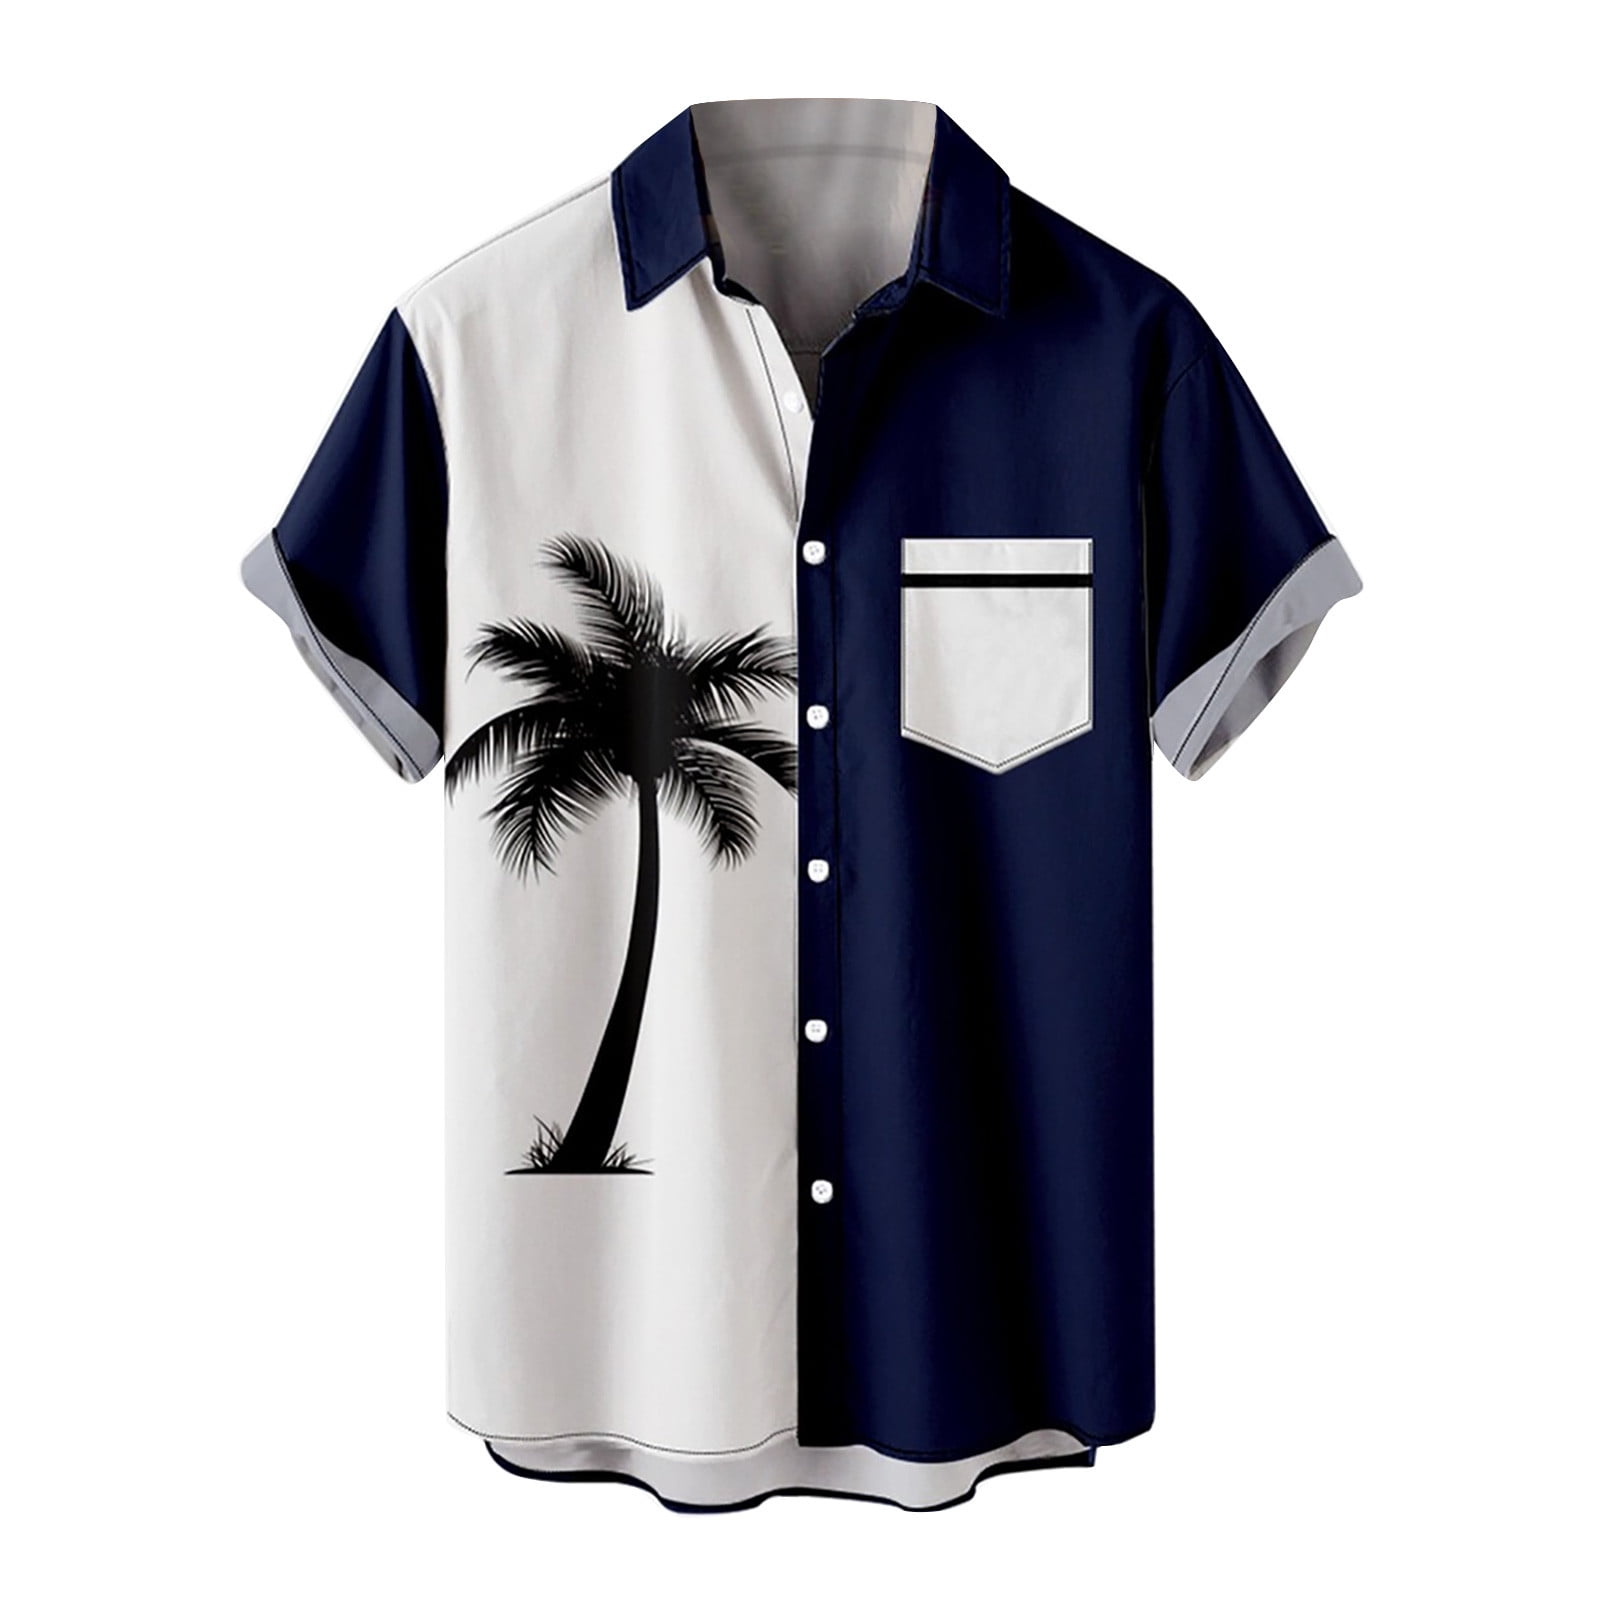 VSSSJ Shirts for Men Big and Tall Casual Button Down Short Sleeve